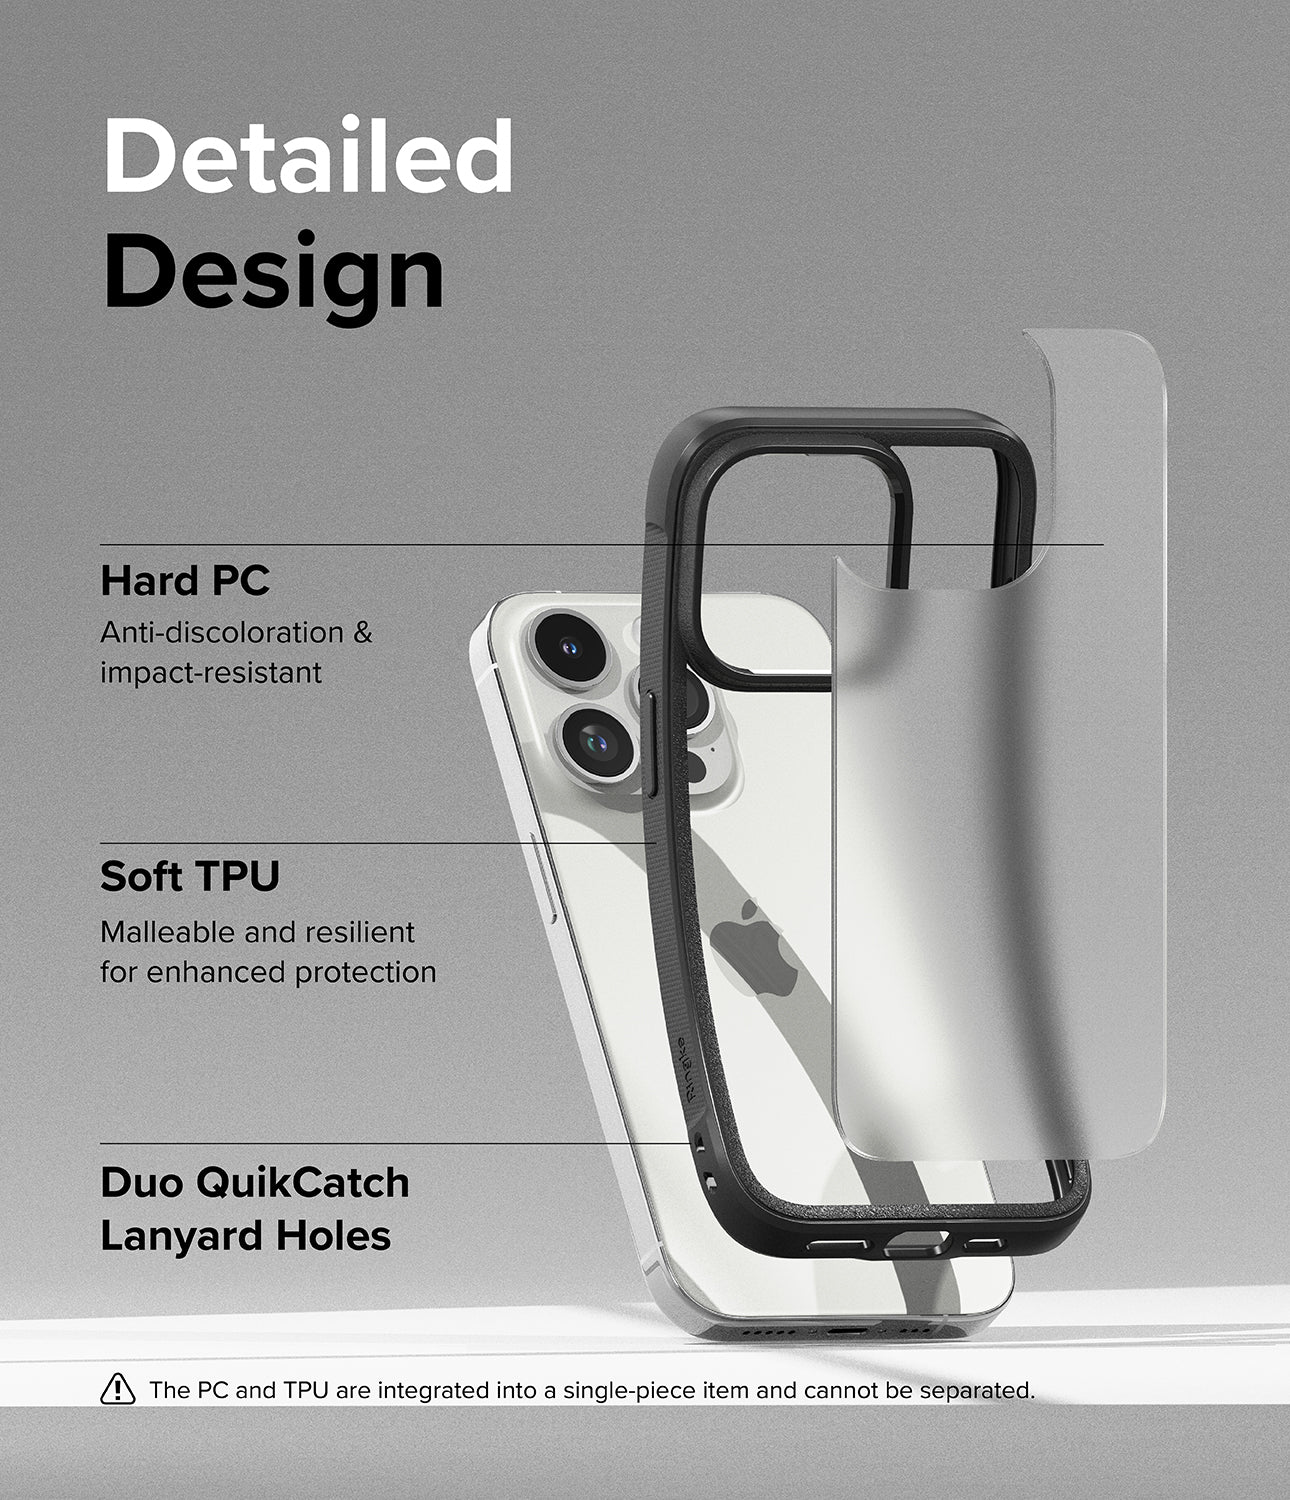 iPhone 15 Pro Case | Fusion Bold - Matte/Black - Detailed Design. Anti-discoloration and impact-resistant with Hard PC. Malleable and resilient for enhanced protection with Soft TPU. Duo QuikCatch Lanyard Holes.